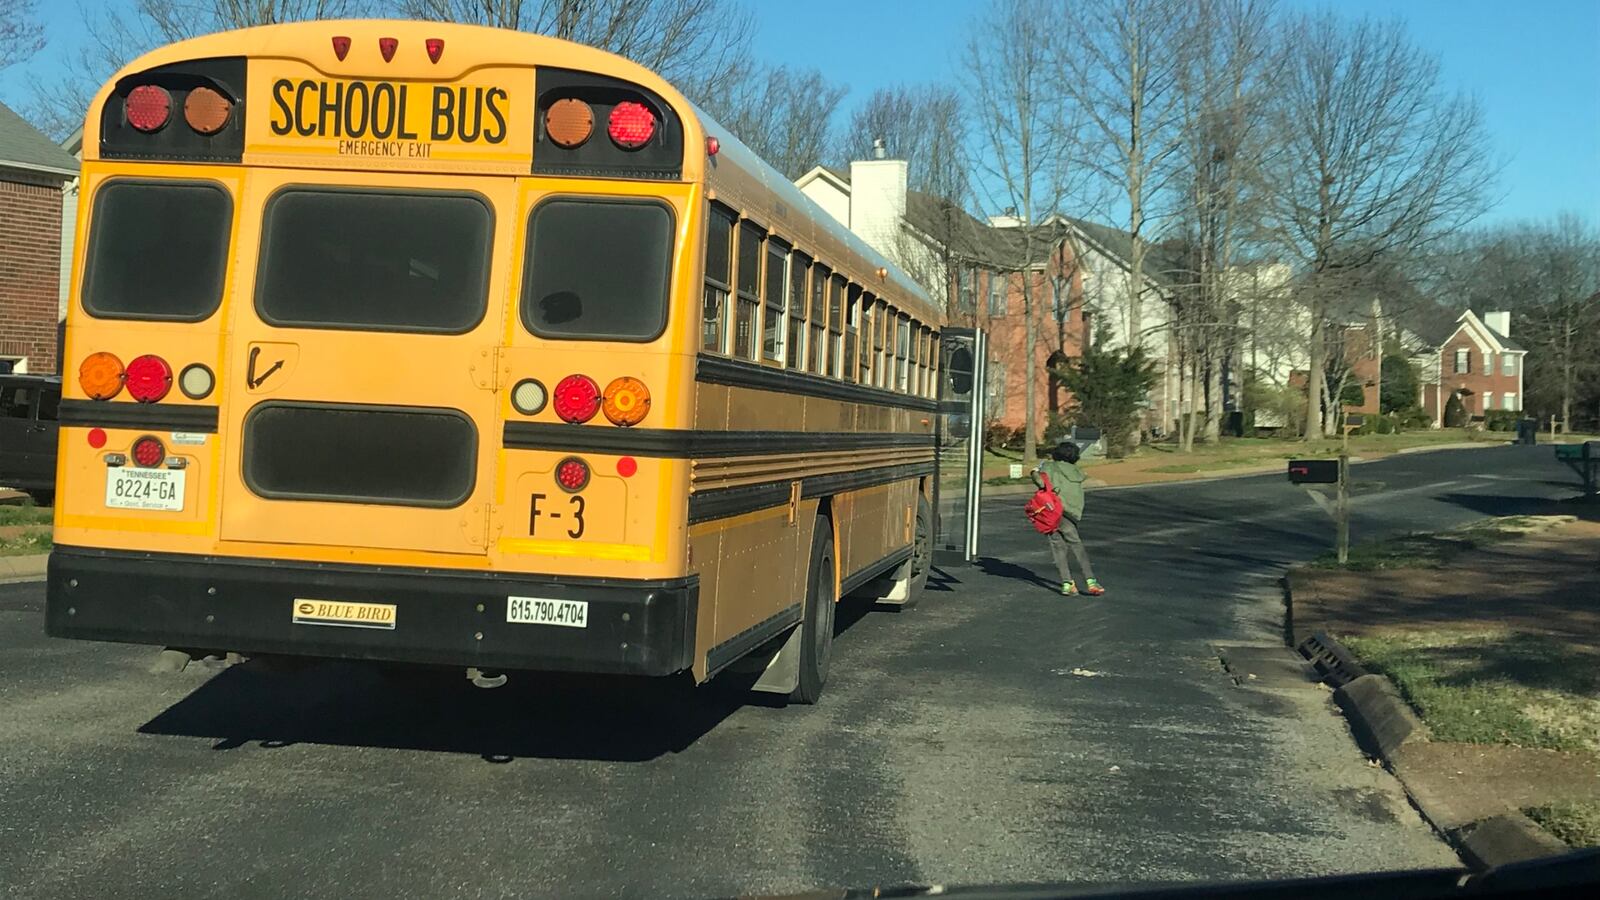 A student steps off the bus Thursday in Williamson County, where two school districts will be closed for two days after a resident was diagnosed with the new coronavirus. Williamson County is located south of Nashville.